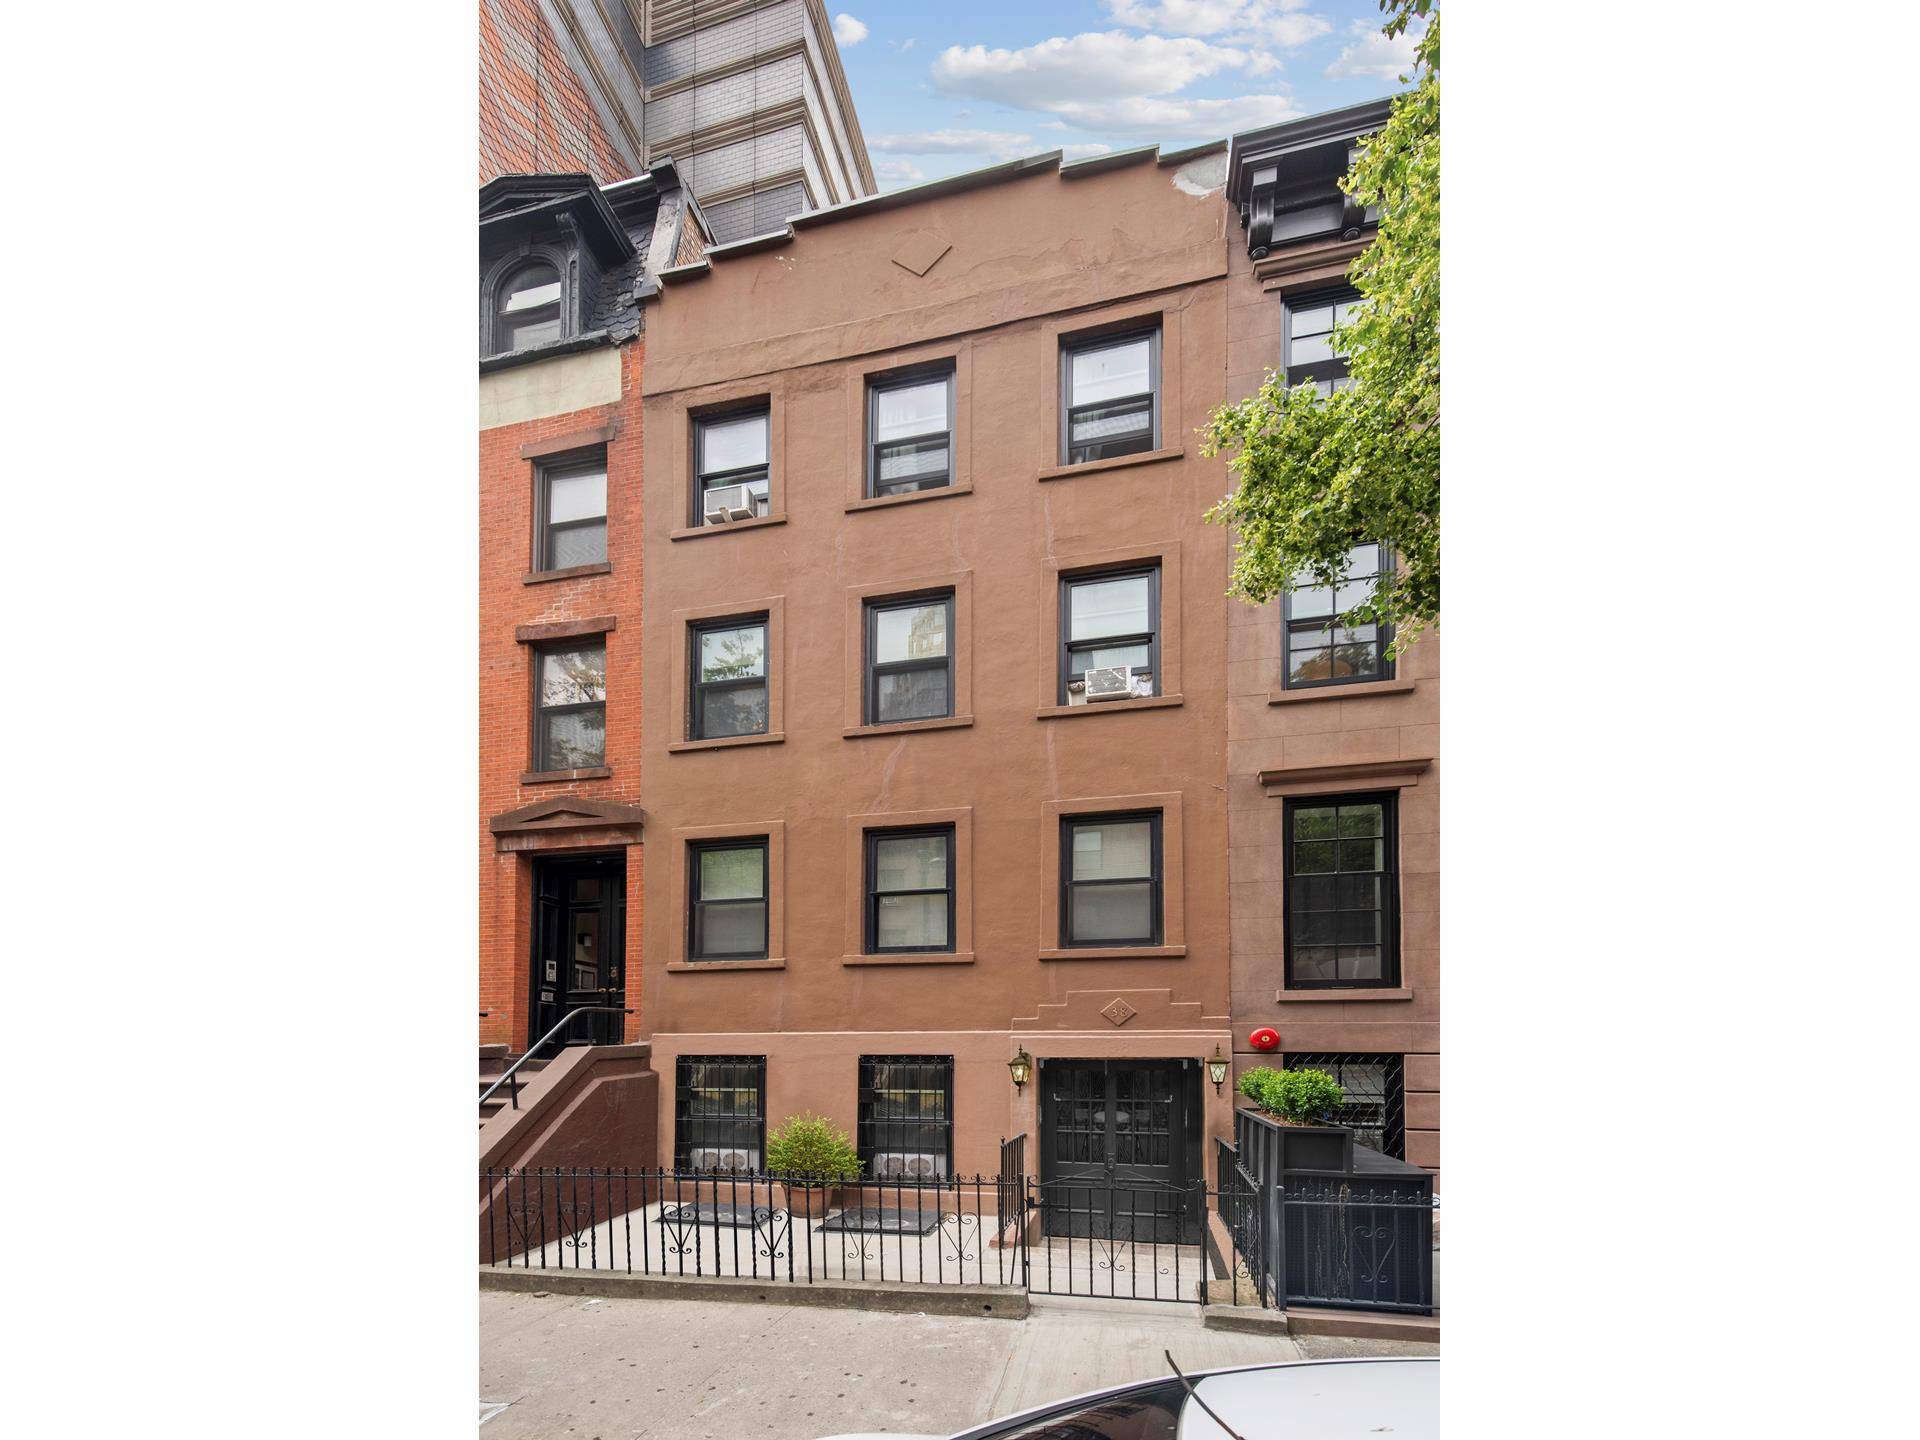 A rare and exceptional multi unit townhouse opportunity in the heart of Brooklyn Heights.